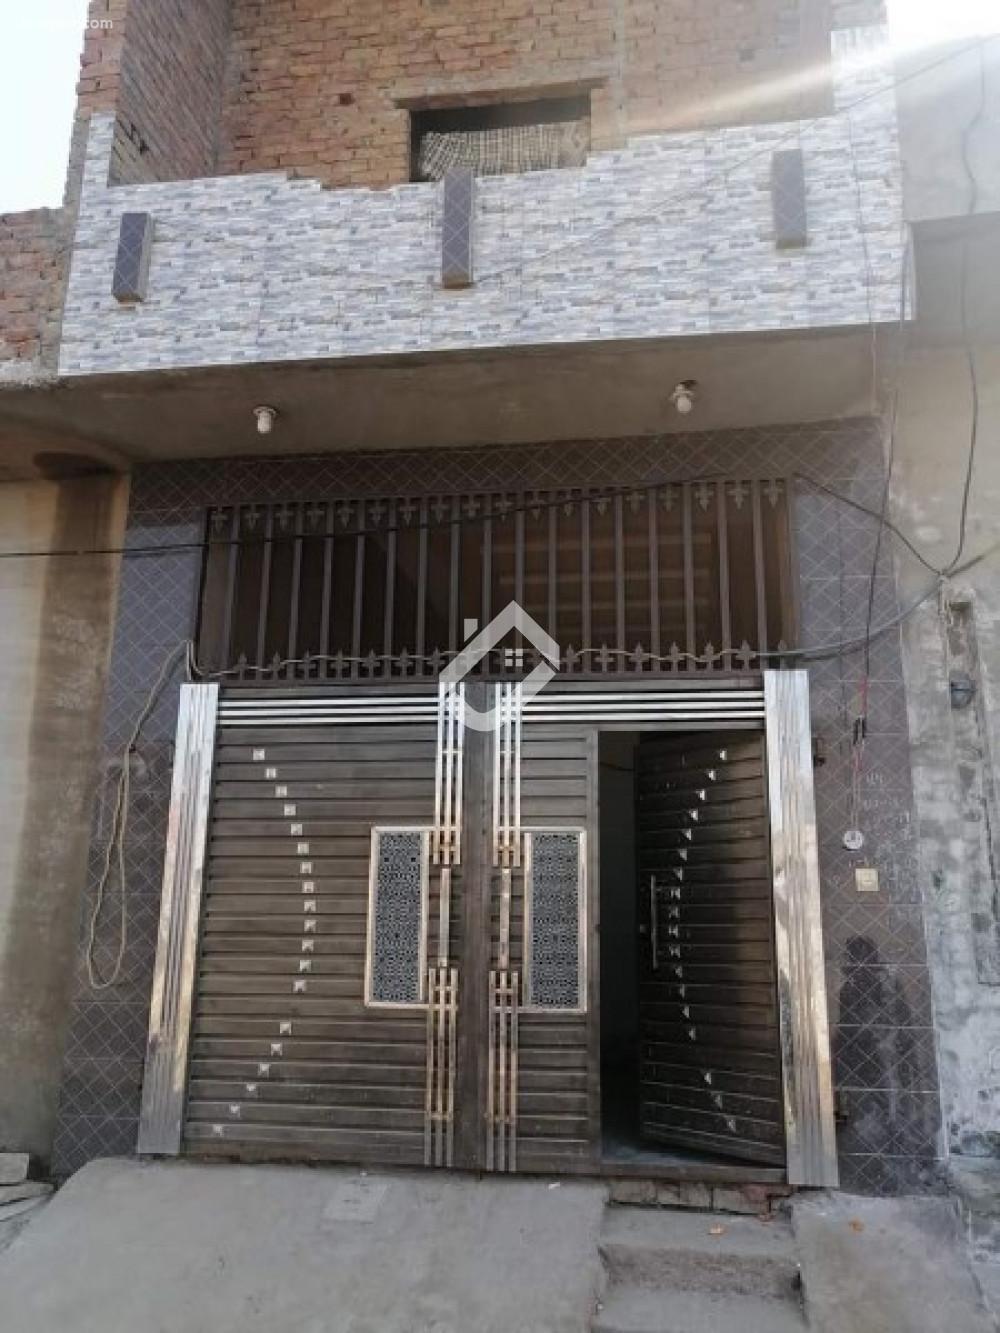 View  2 Marla Double Storey House For Sale In Iqbal Colony  in Iqbal Colony, Sargodha